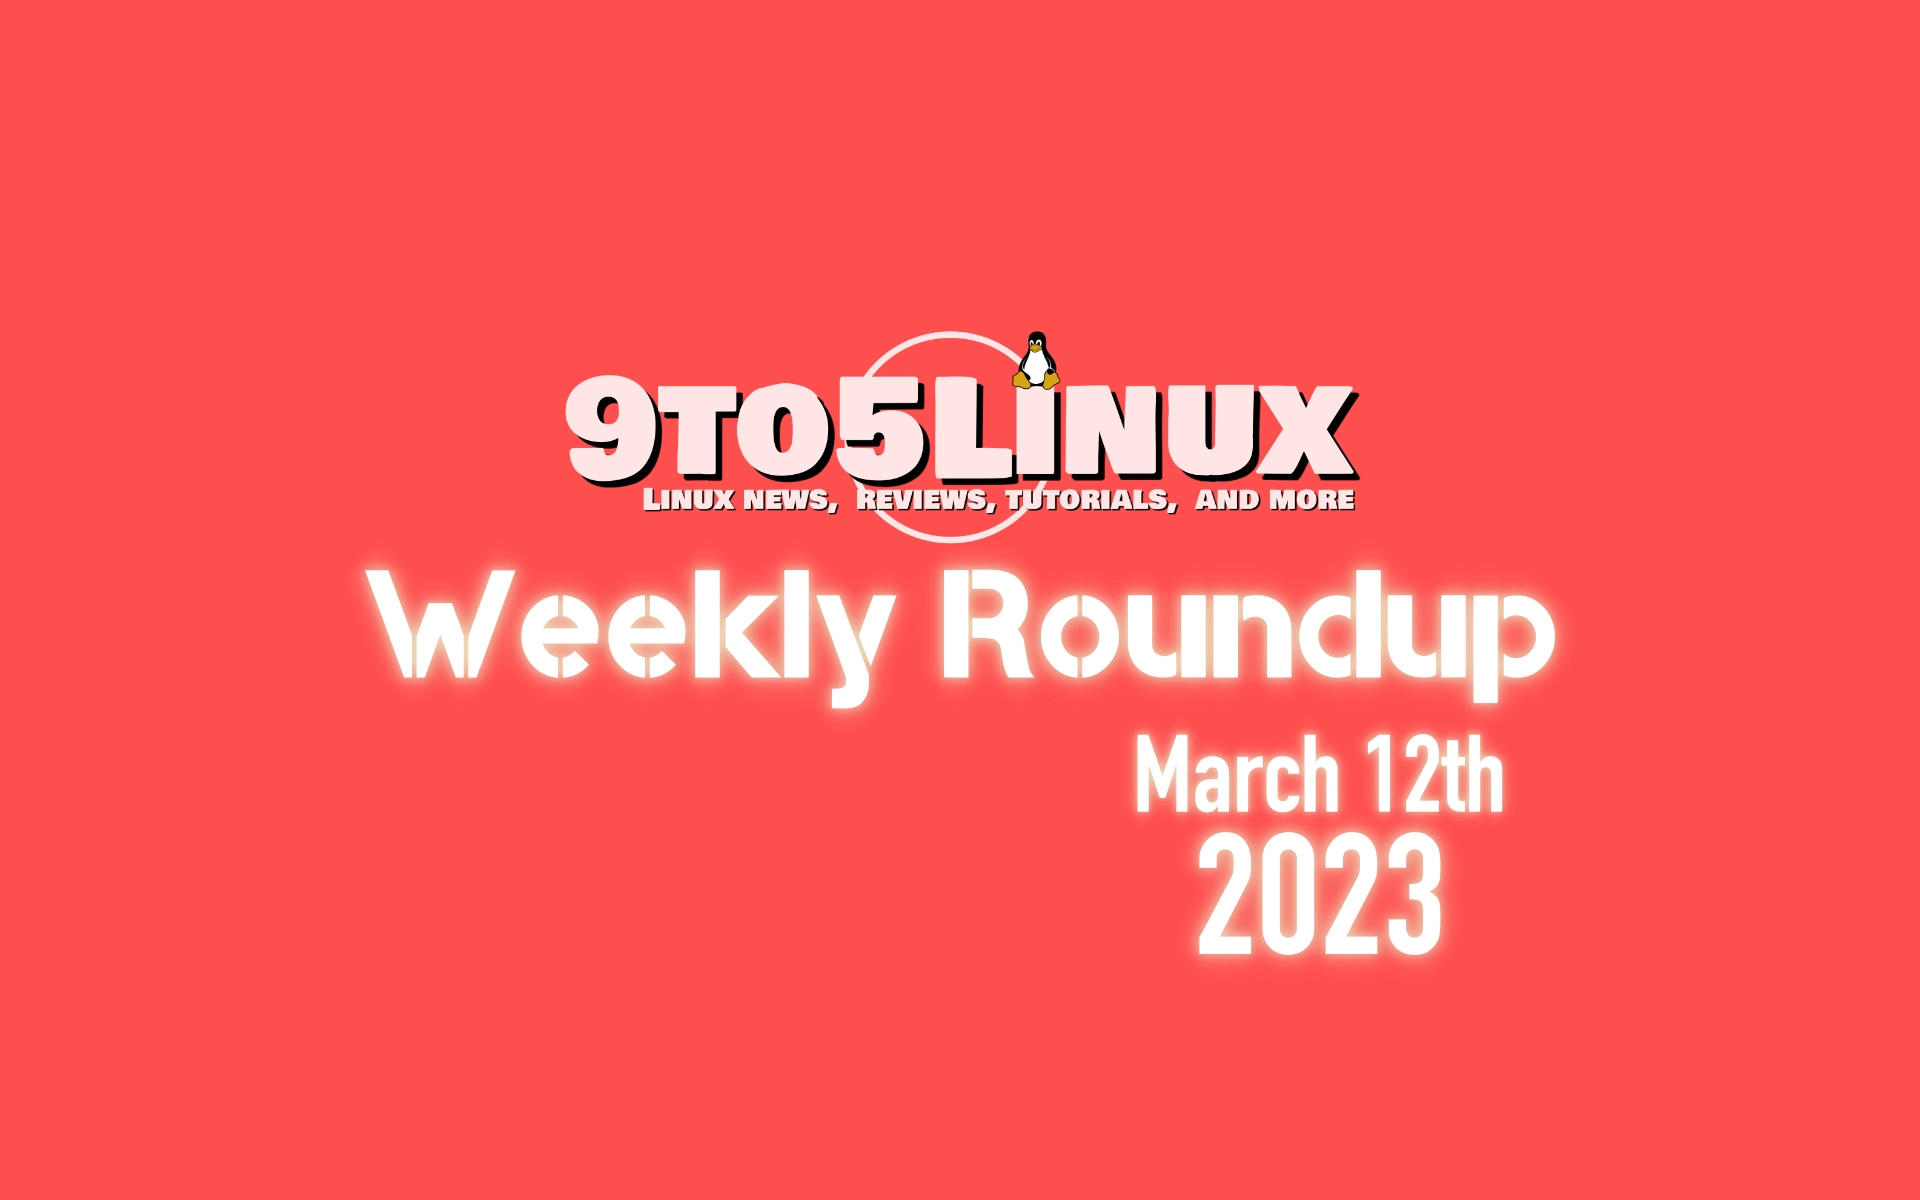 9to5Linux Weekly Roundup: March 12th, 2023